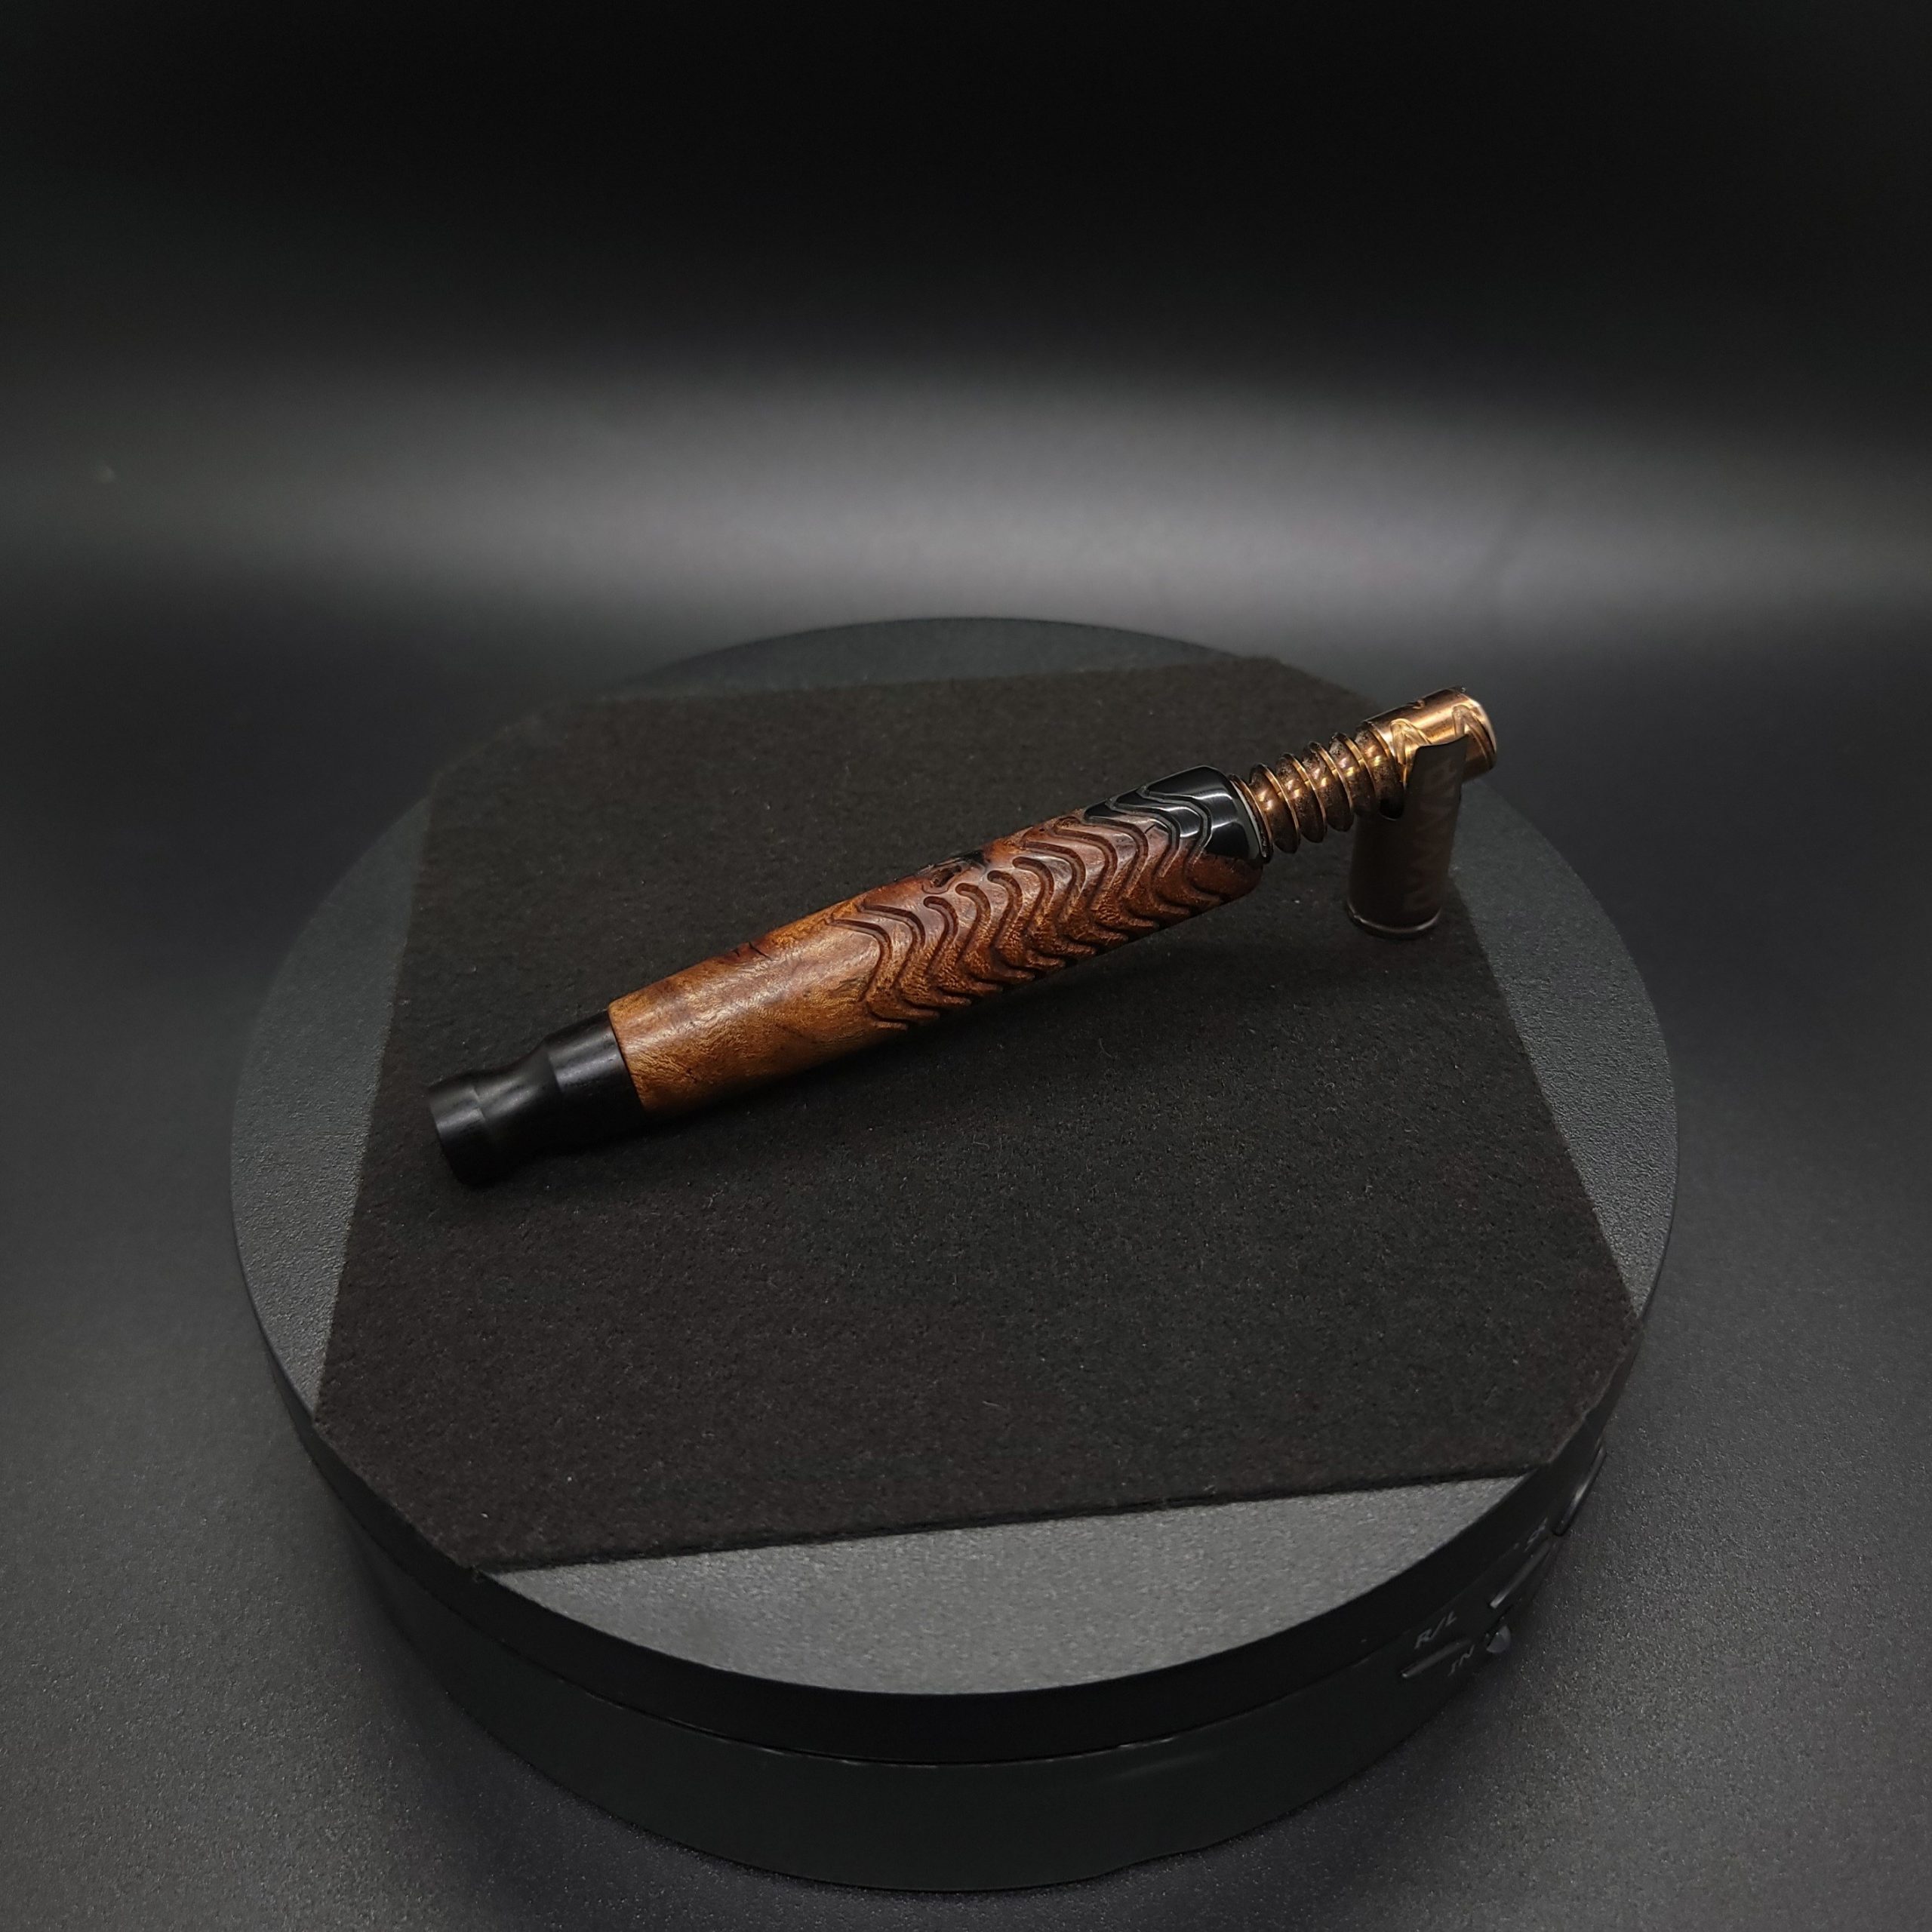 This image portrays Twisted Stems Series-Skeleton Dynavap Stem with Mouthpiece & XL Condenser by Dovetail Woodwork.